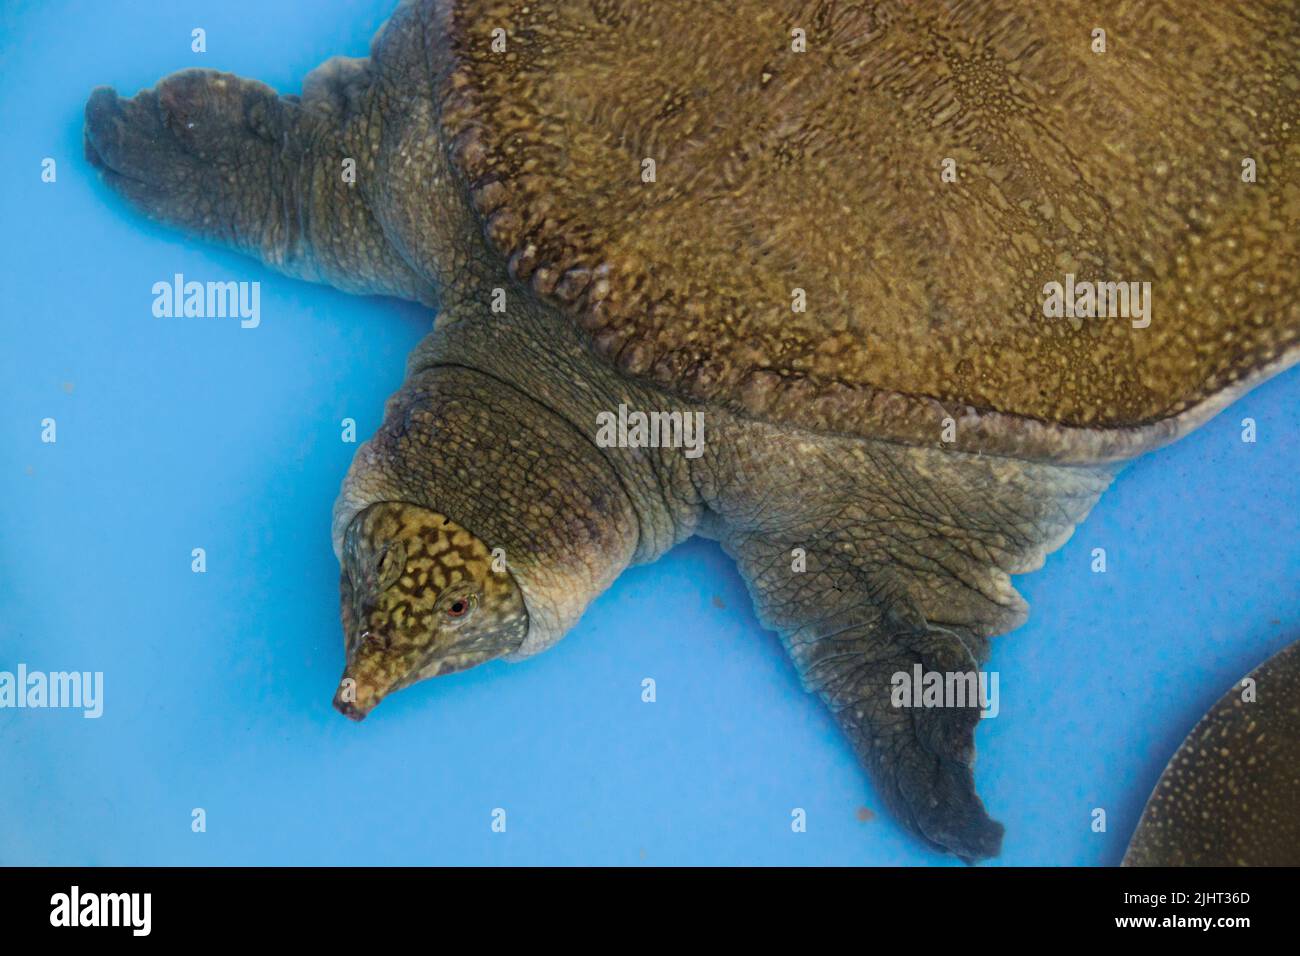 A rare Asiatic softshell turtle or black-rayed softshell turtle (Amyda cartilaginea) rescued from poachers in Cambodia Stock Photo